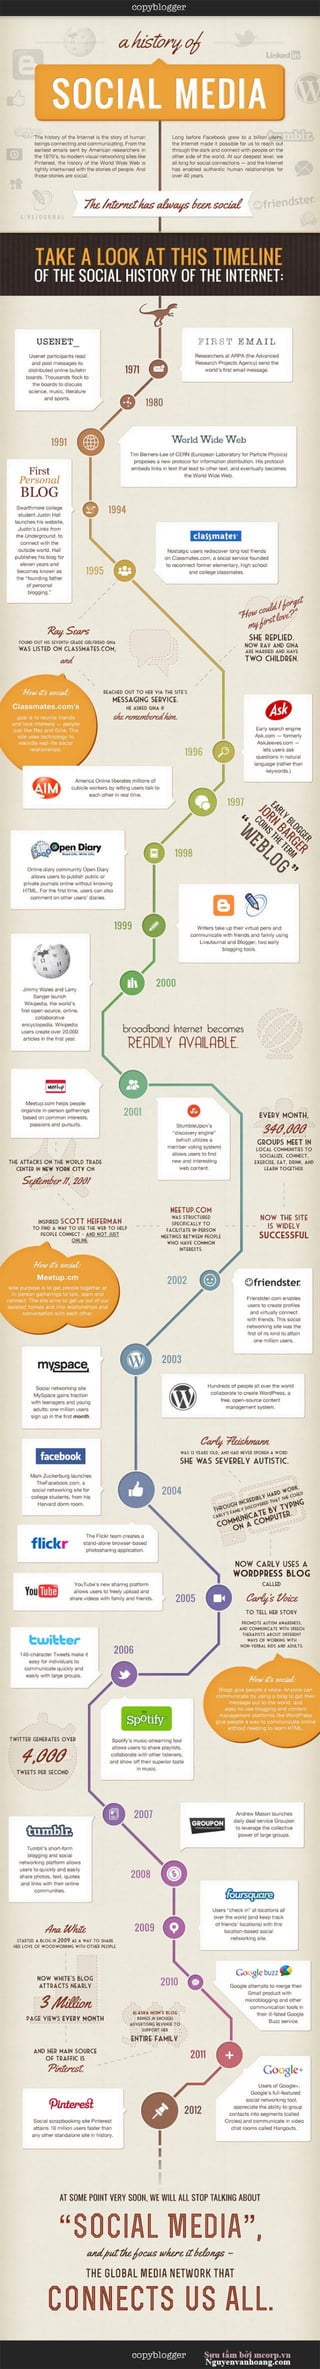 History of social media infographic